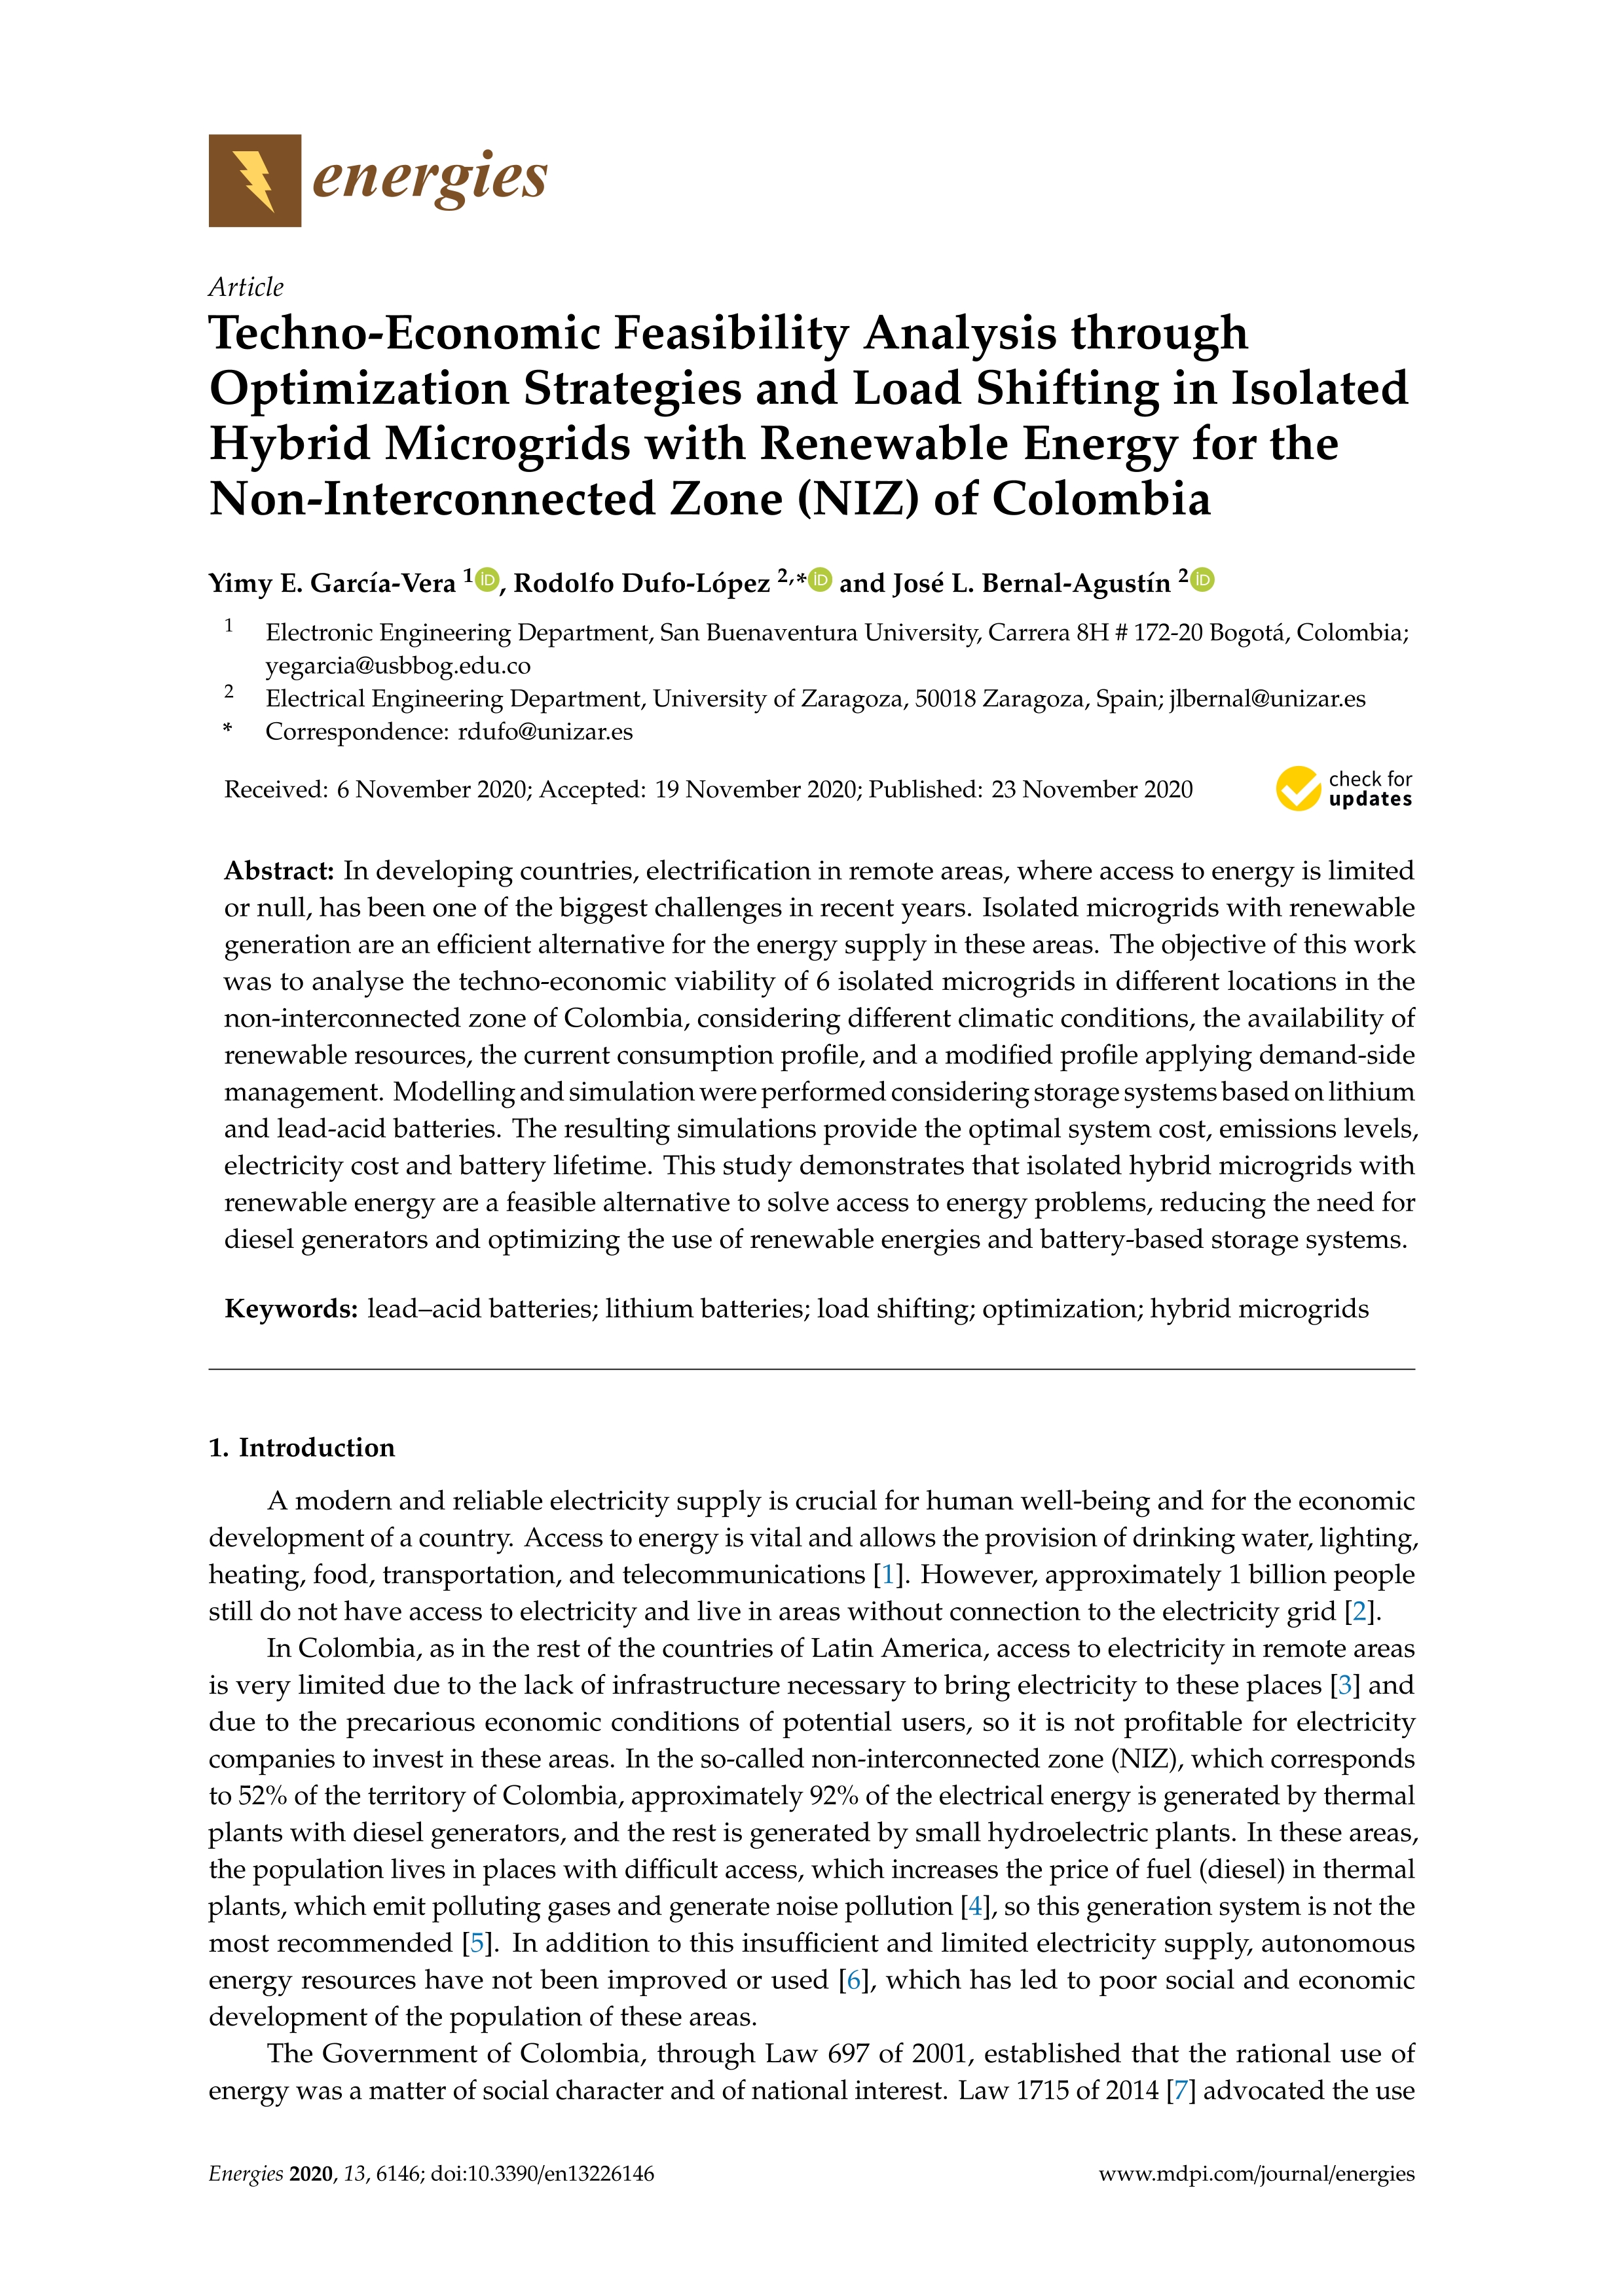 Techno-Economic Feasibility Analysis through Optimization Strategies and Load Shifting in Isolated Hybrid Microgrids with Renewable Energy for the Non-Interconnected Zone (NIZ) of Colombia